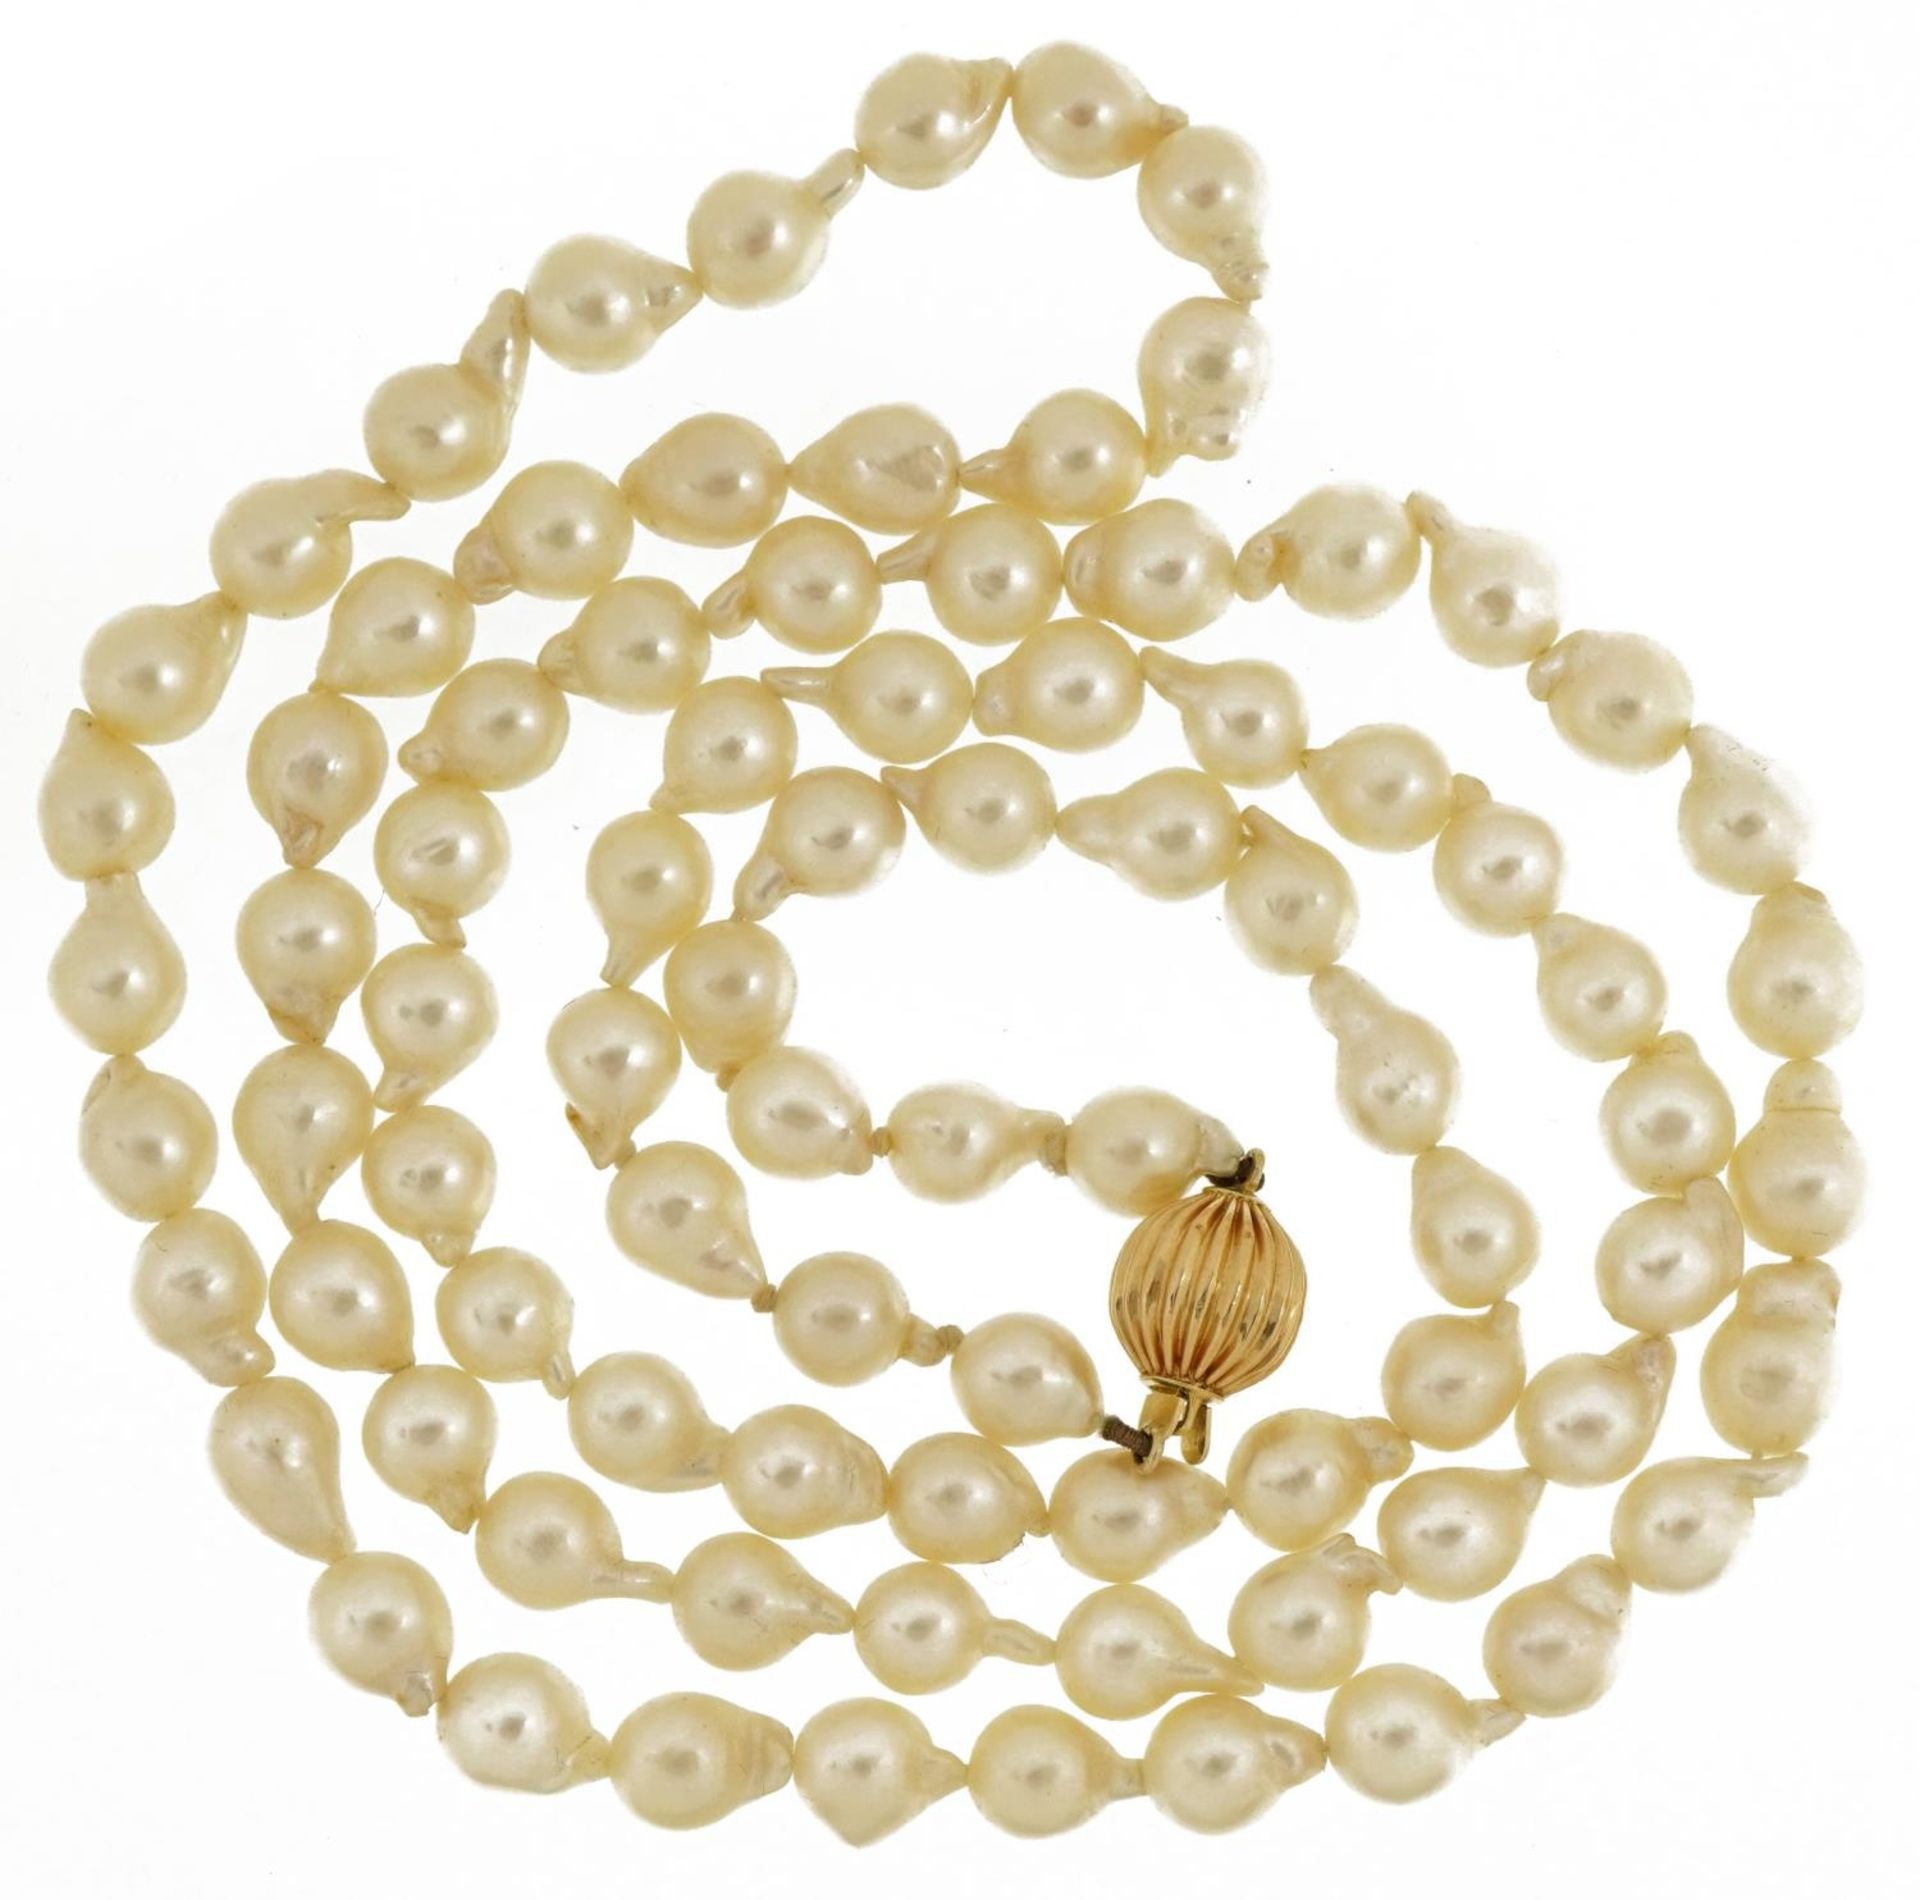 Freshwater pearl single strand necklace with 14k gold ball clasp housed in a Mackintosh Inspired - Image 2 of 4